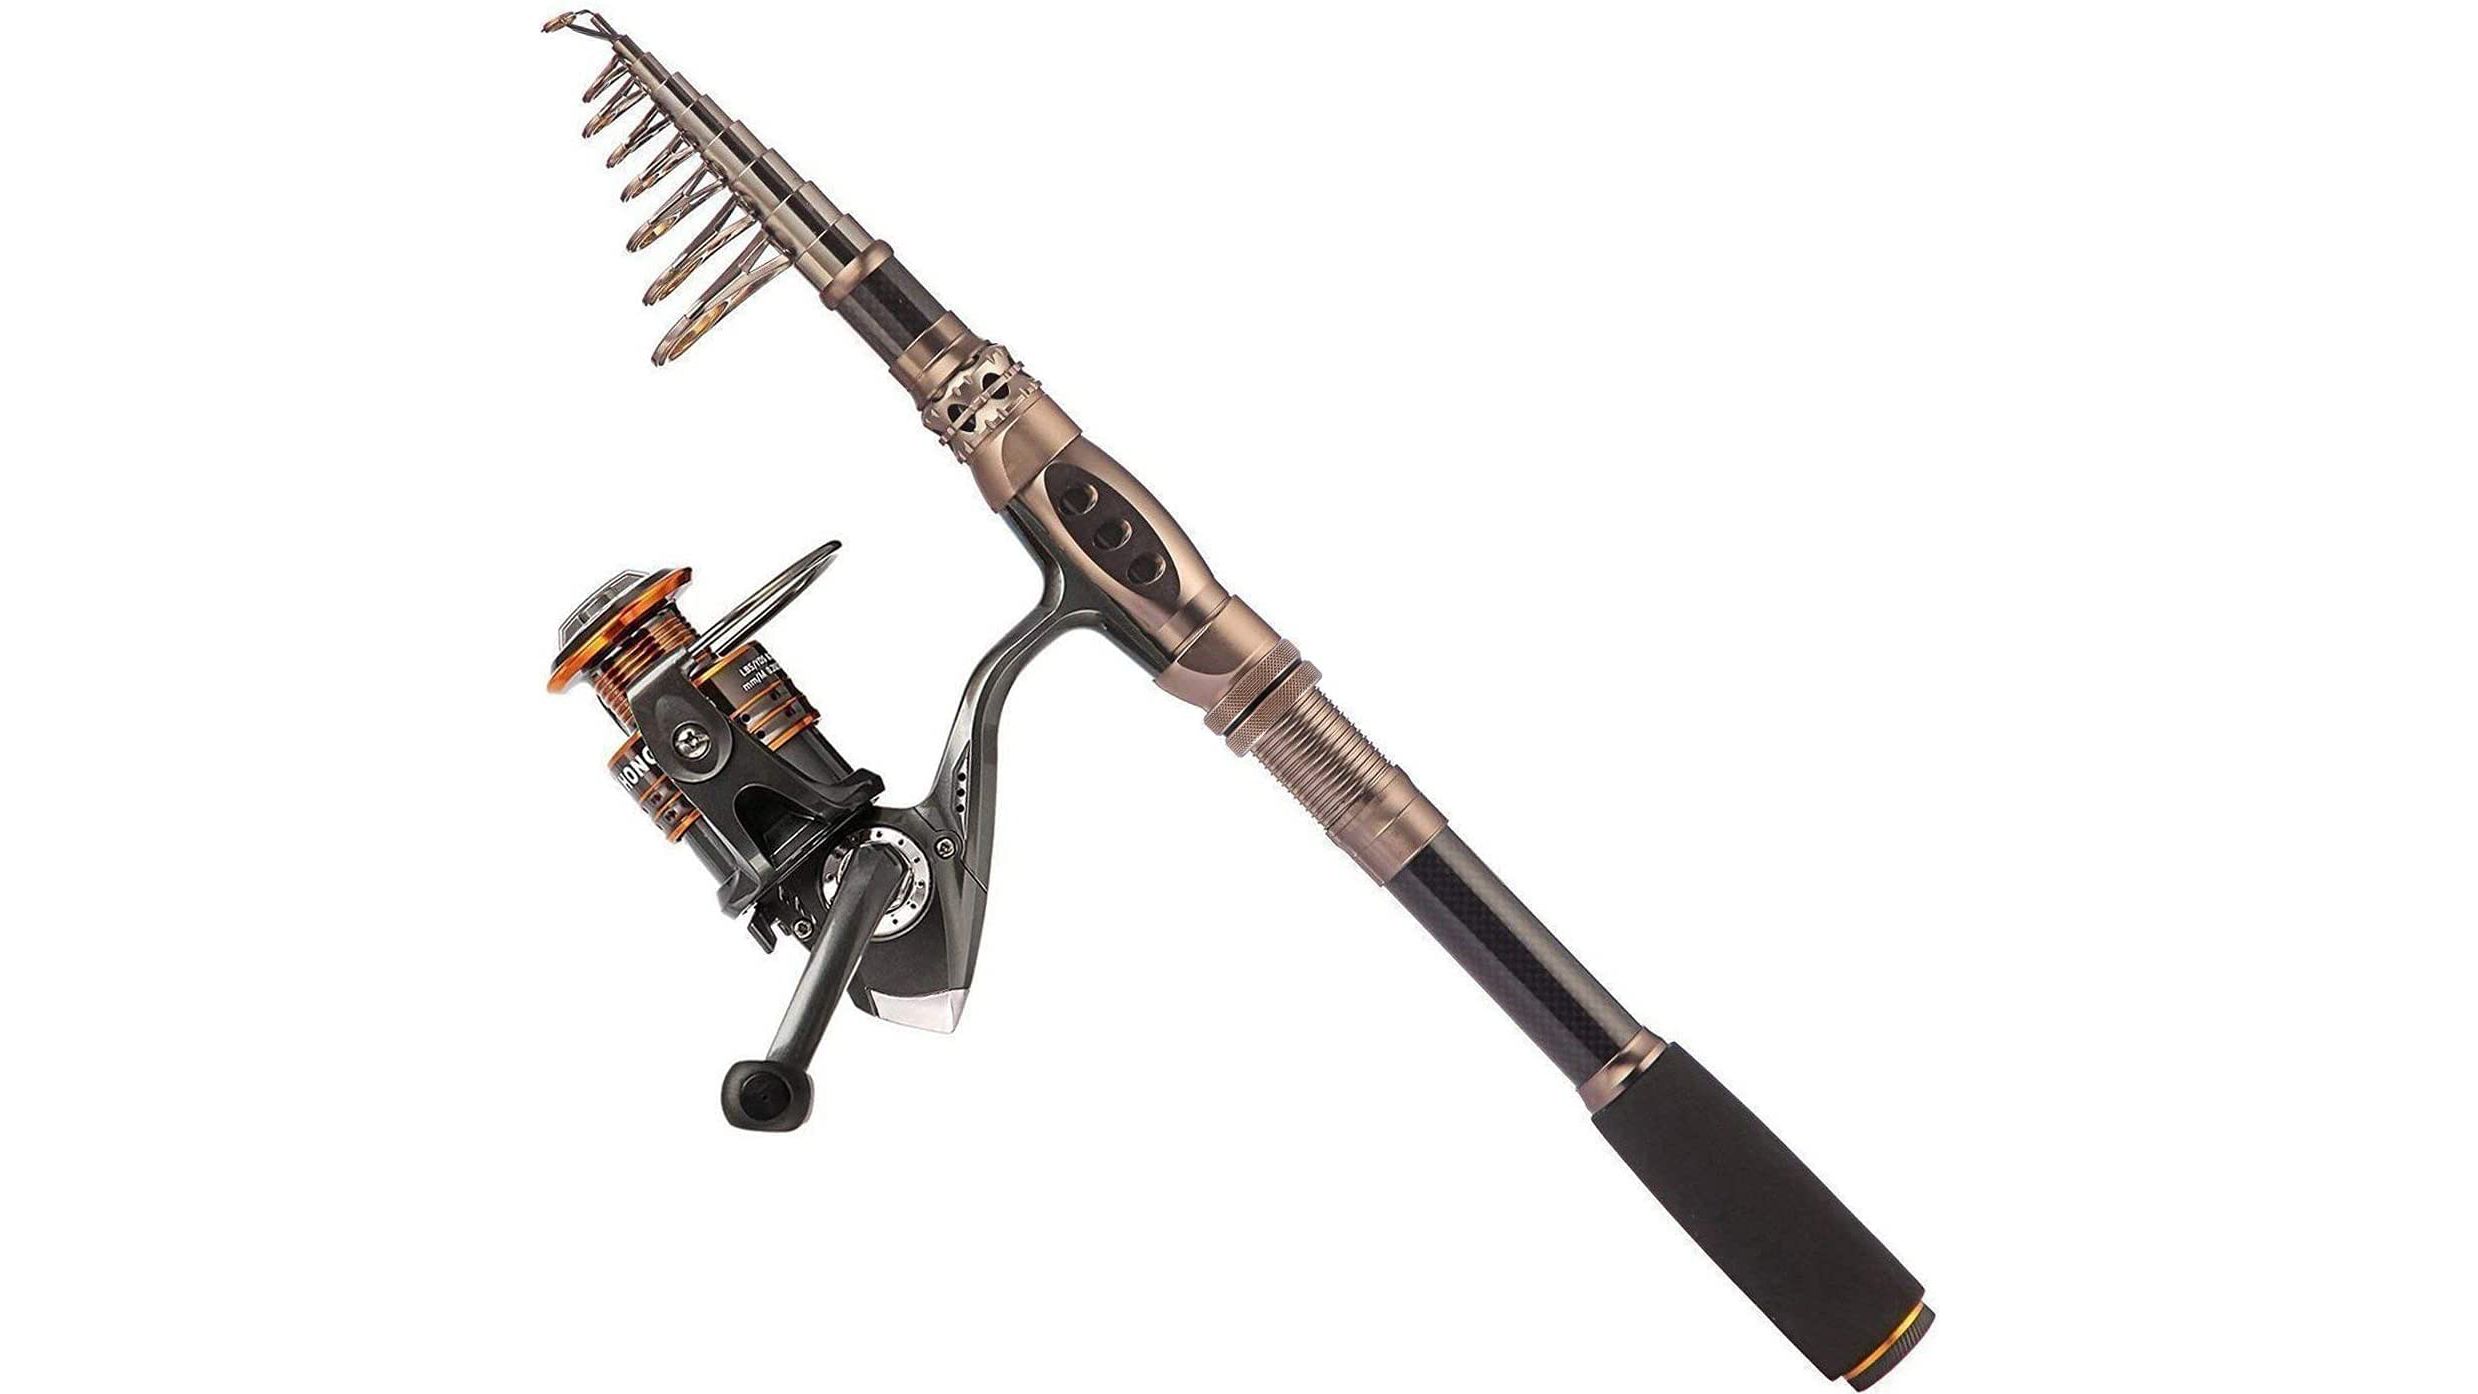 The best 34 fishing rods and poles of 2023